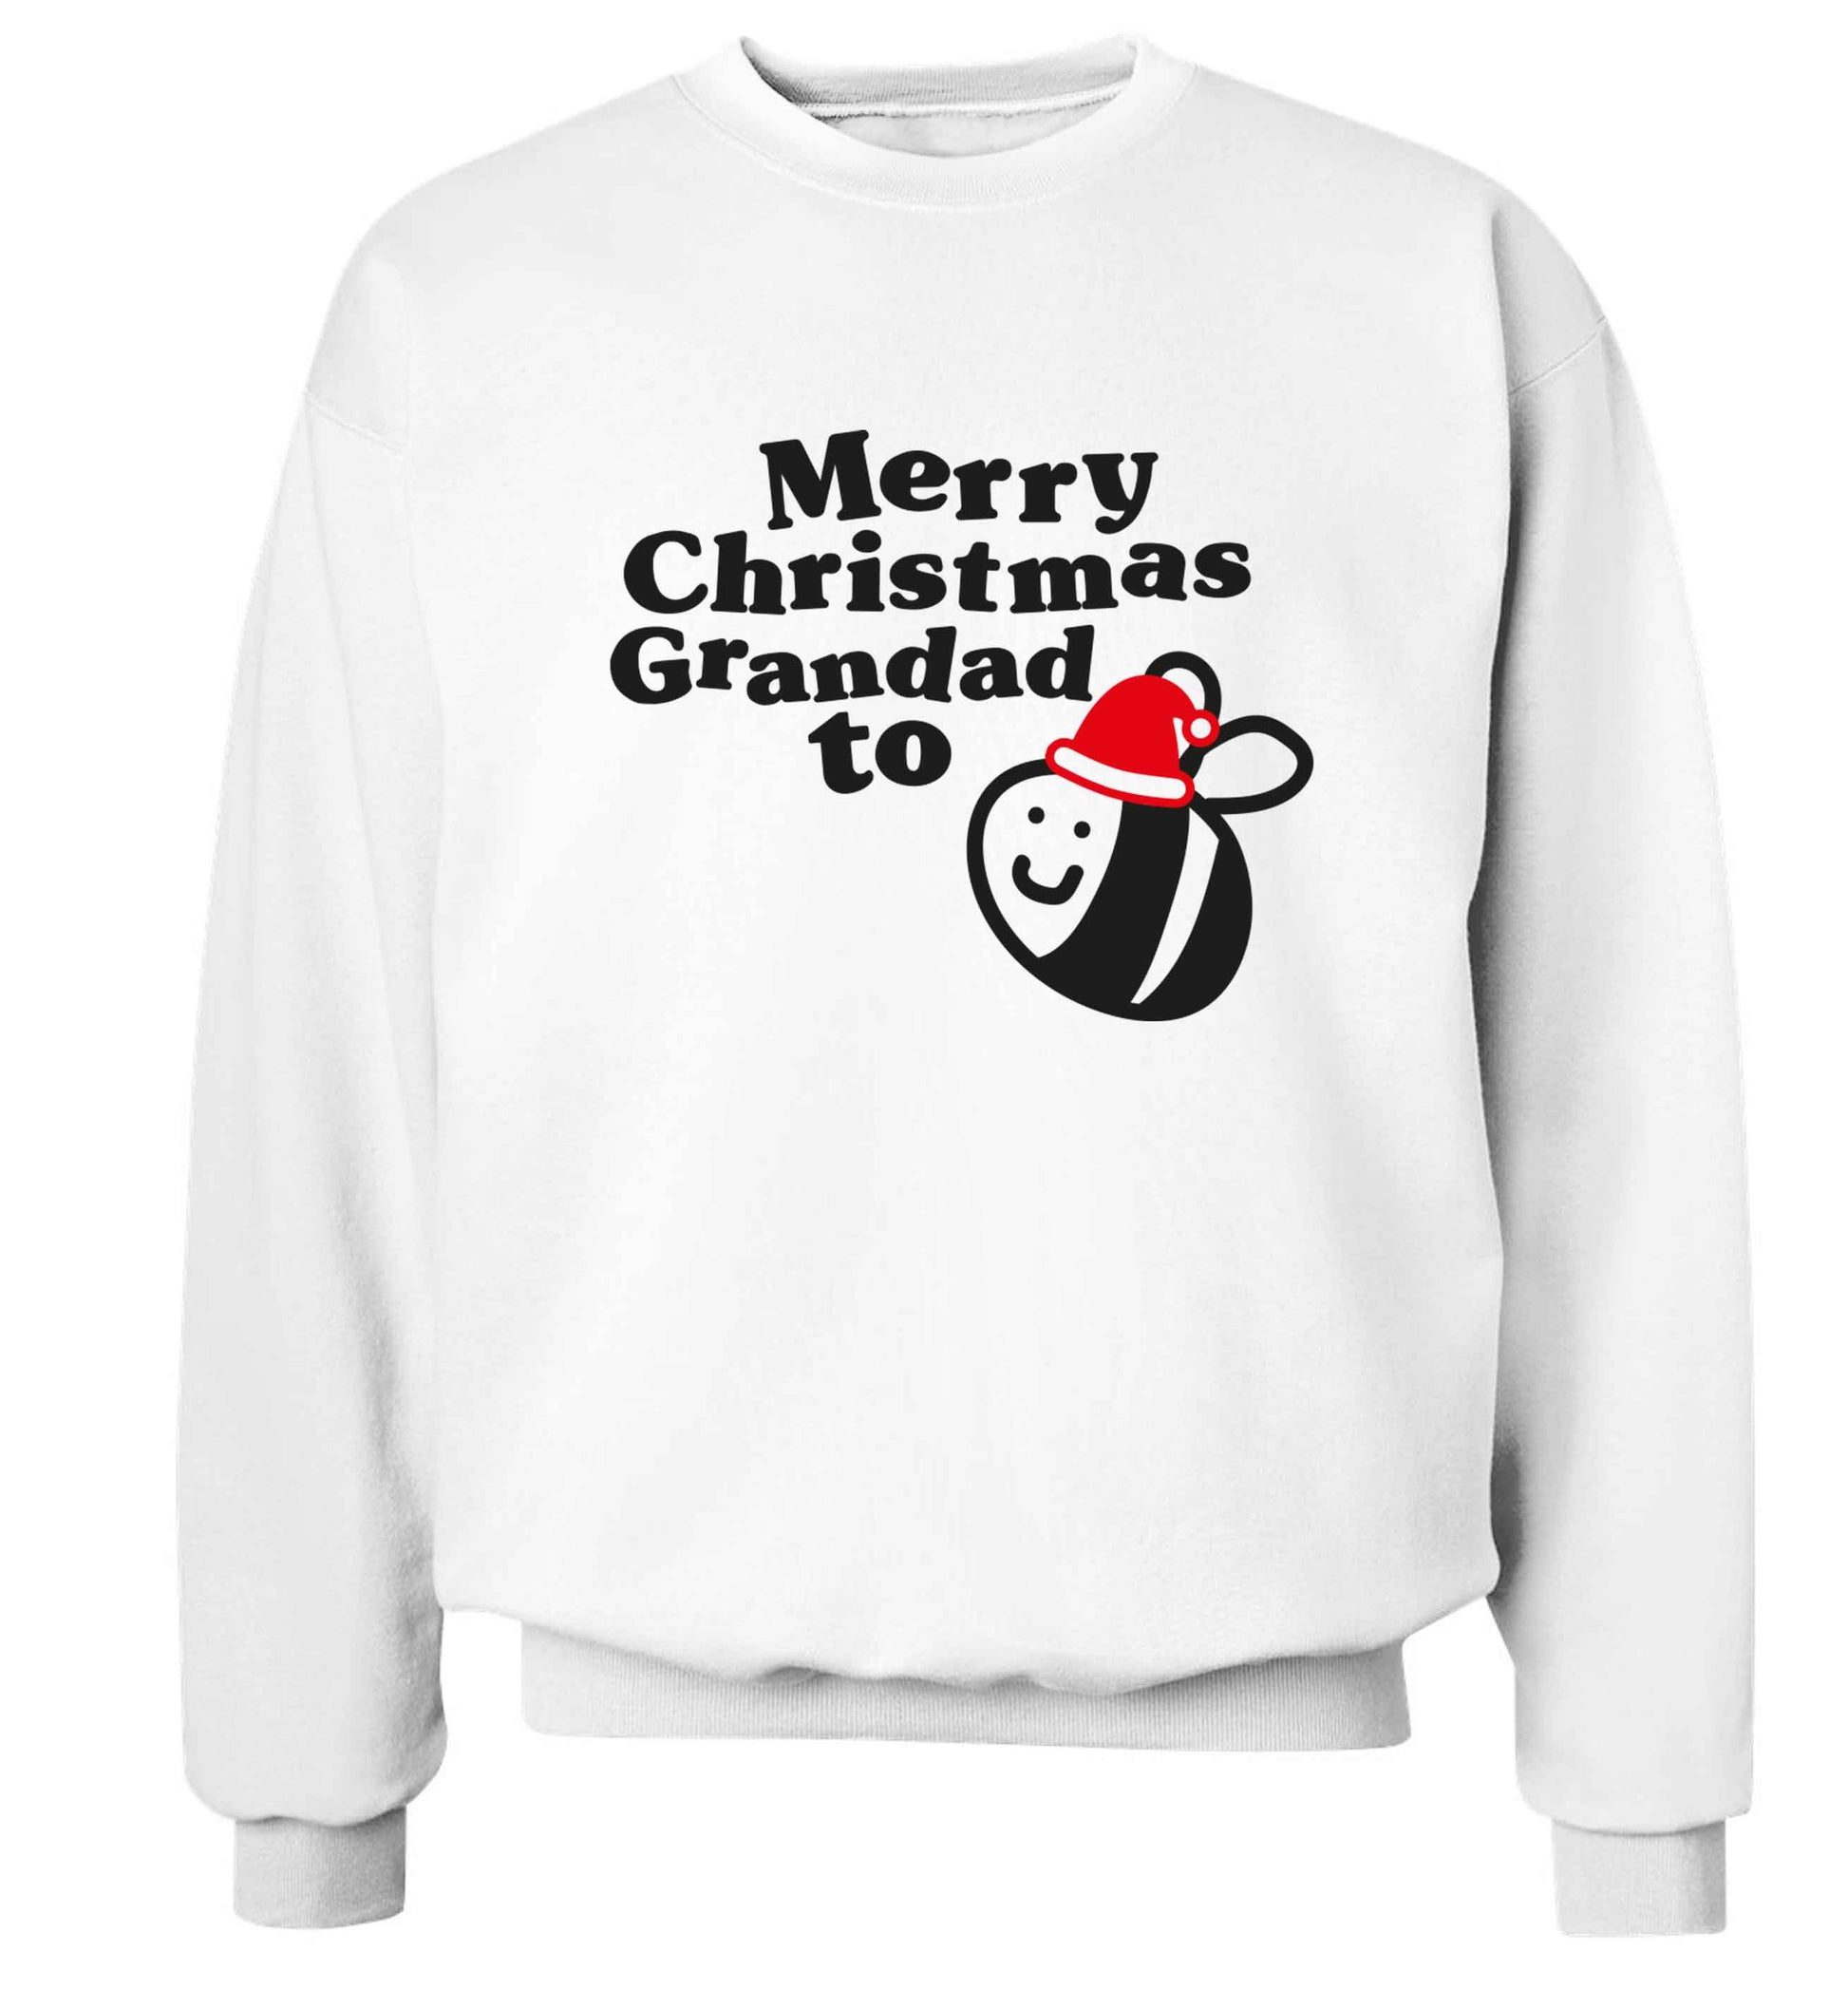 Merry Christmas grandad to be Adult's unisex white Sweater 2XL